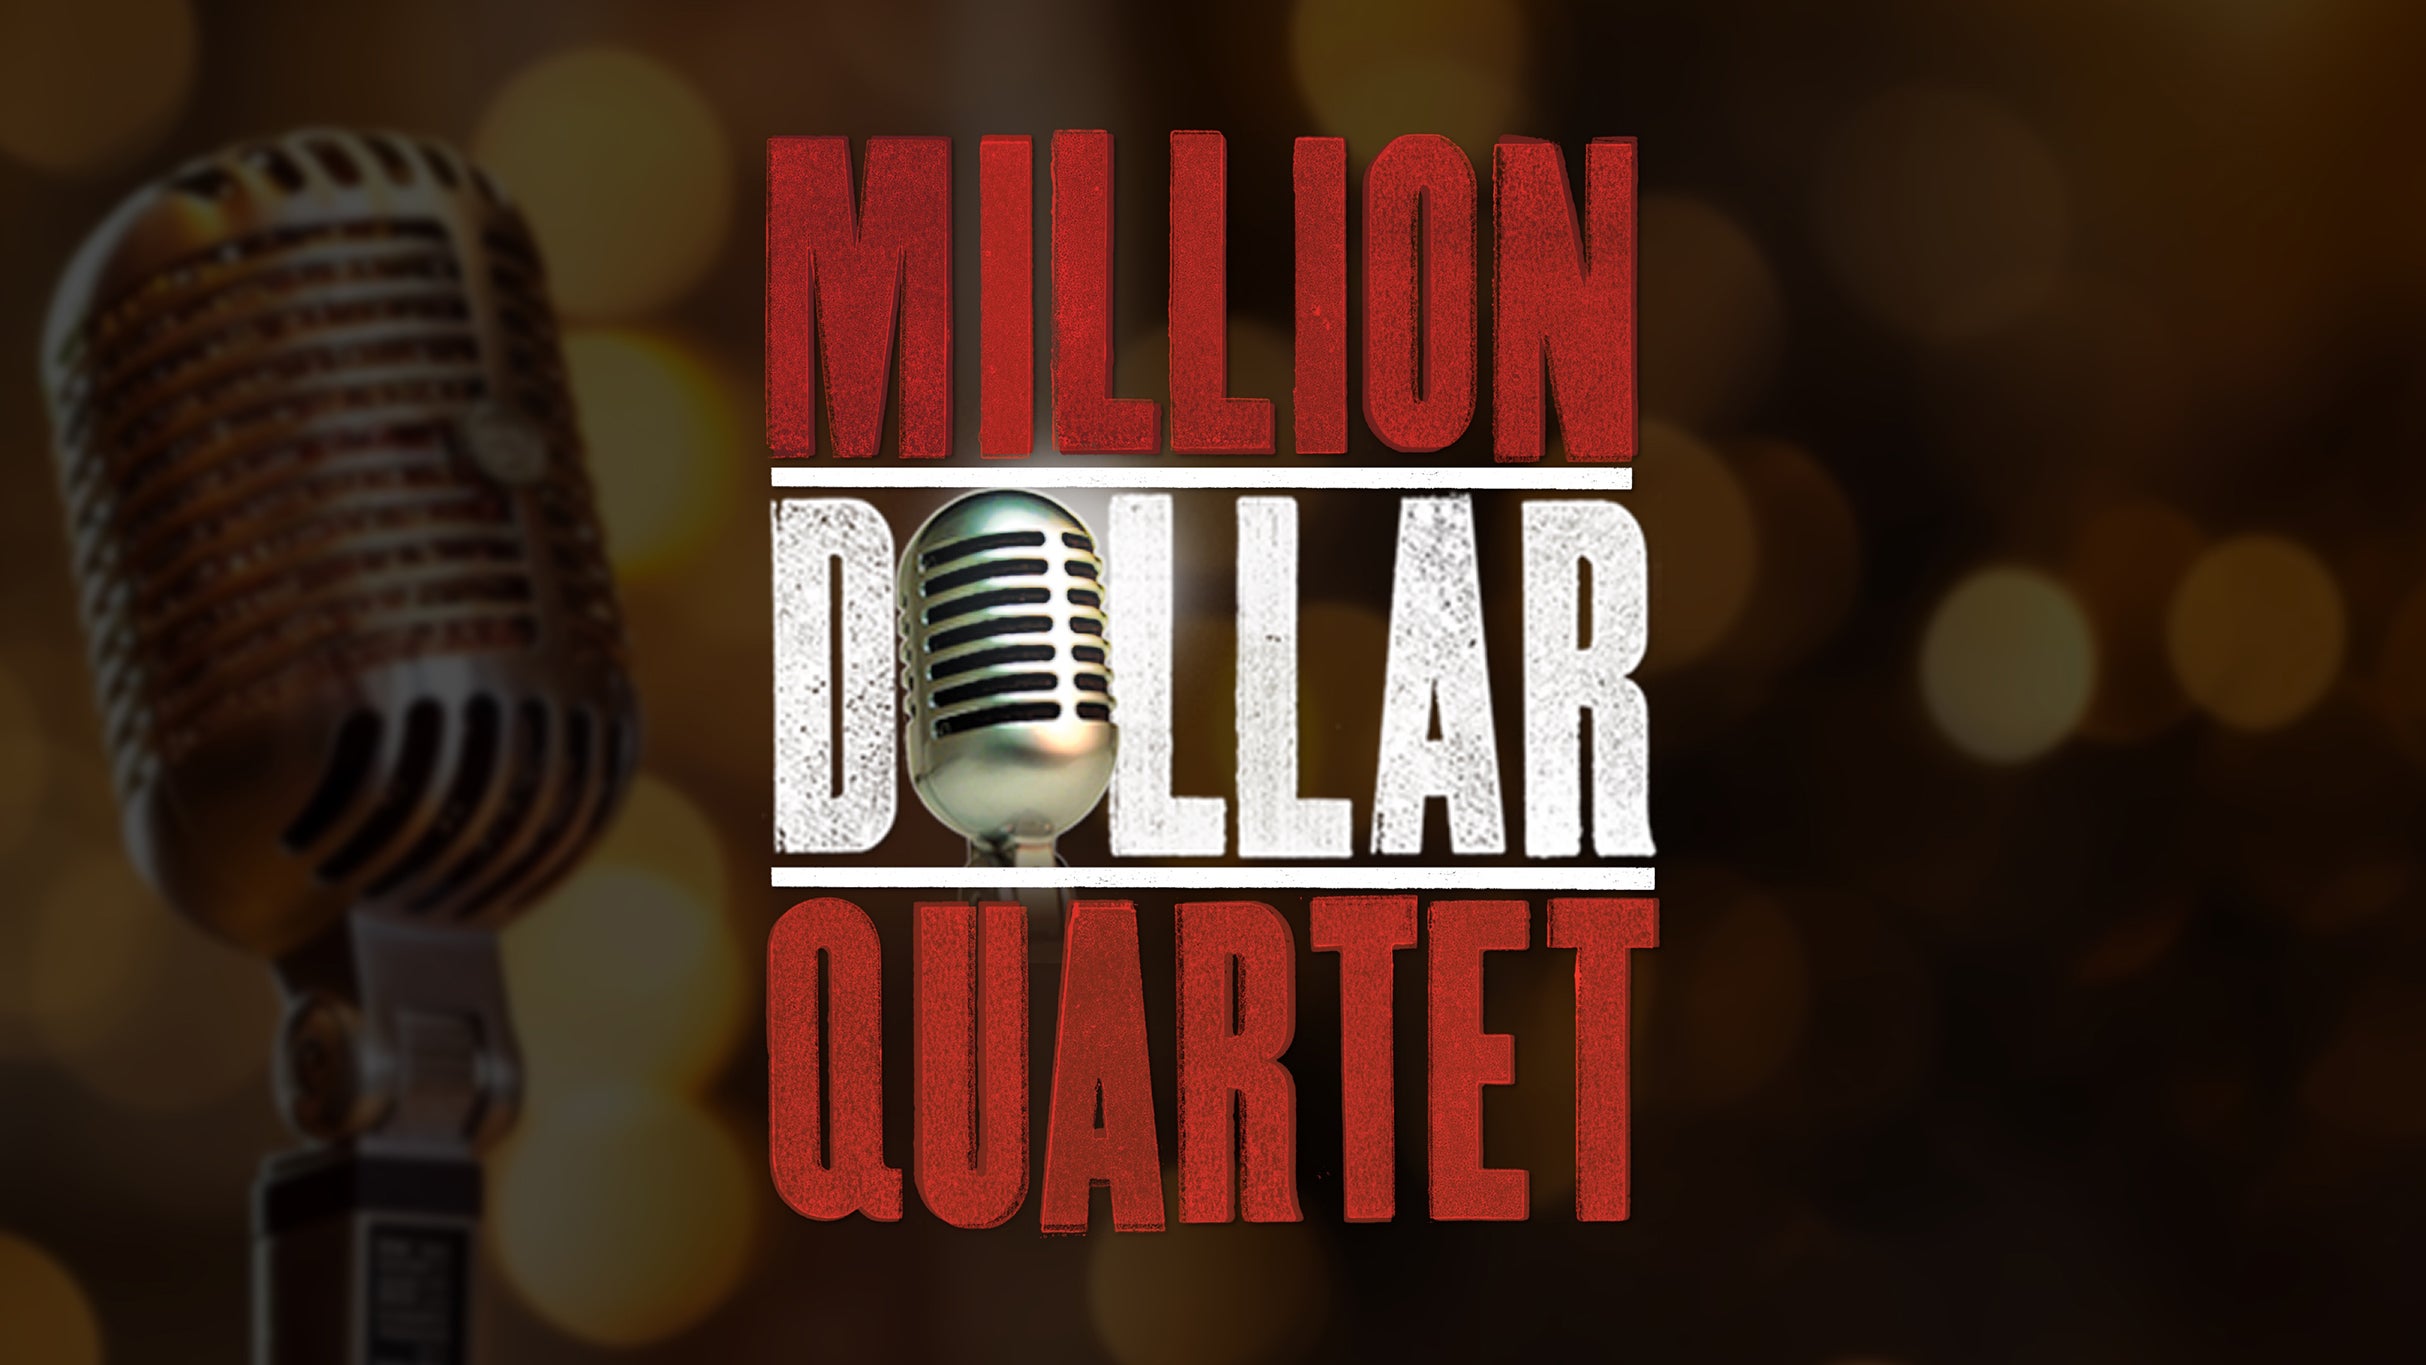 Main image for event titled 5 Star Theatricals presents Million Dollar Quartet